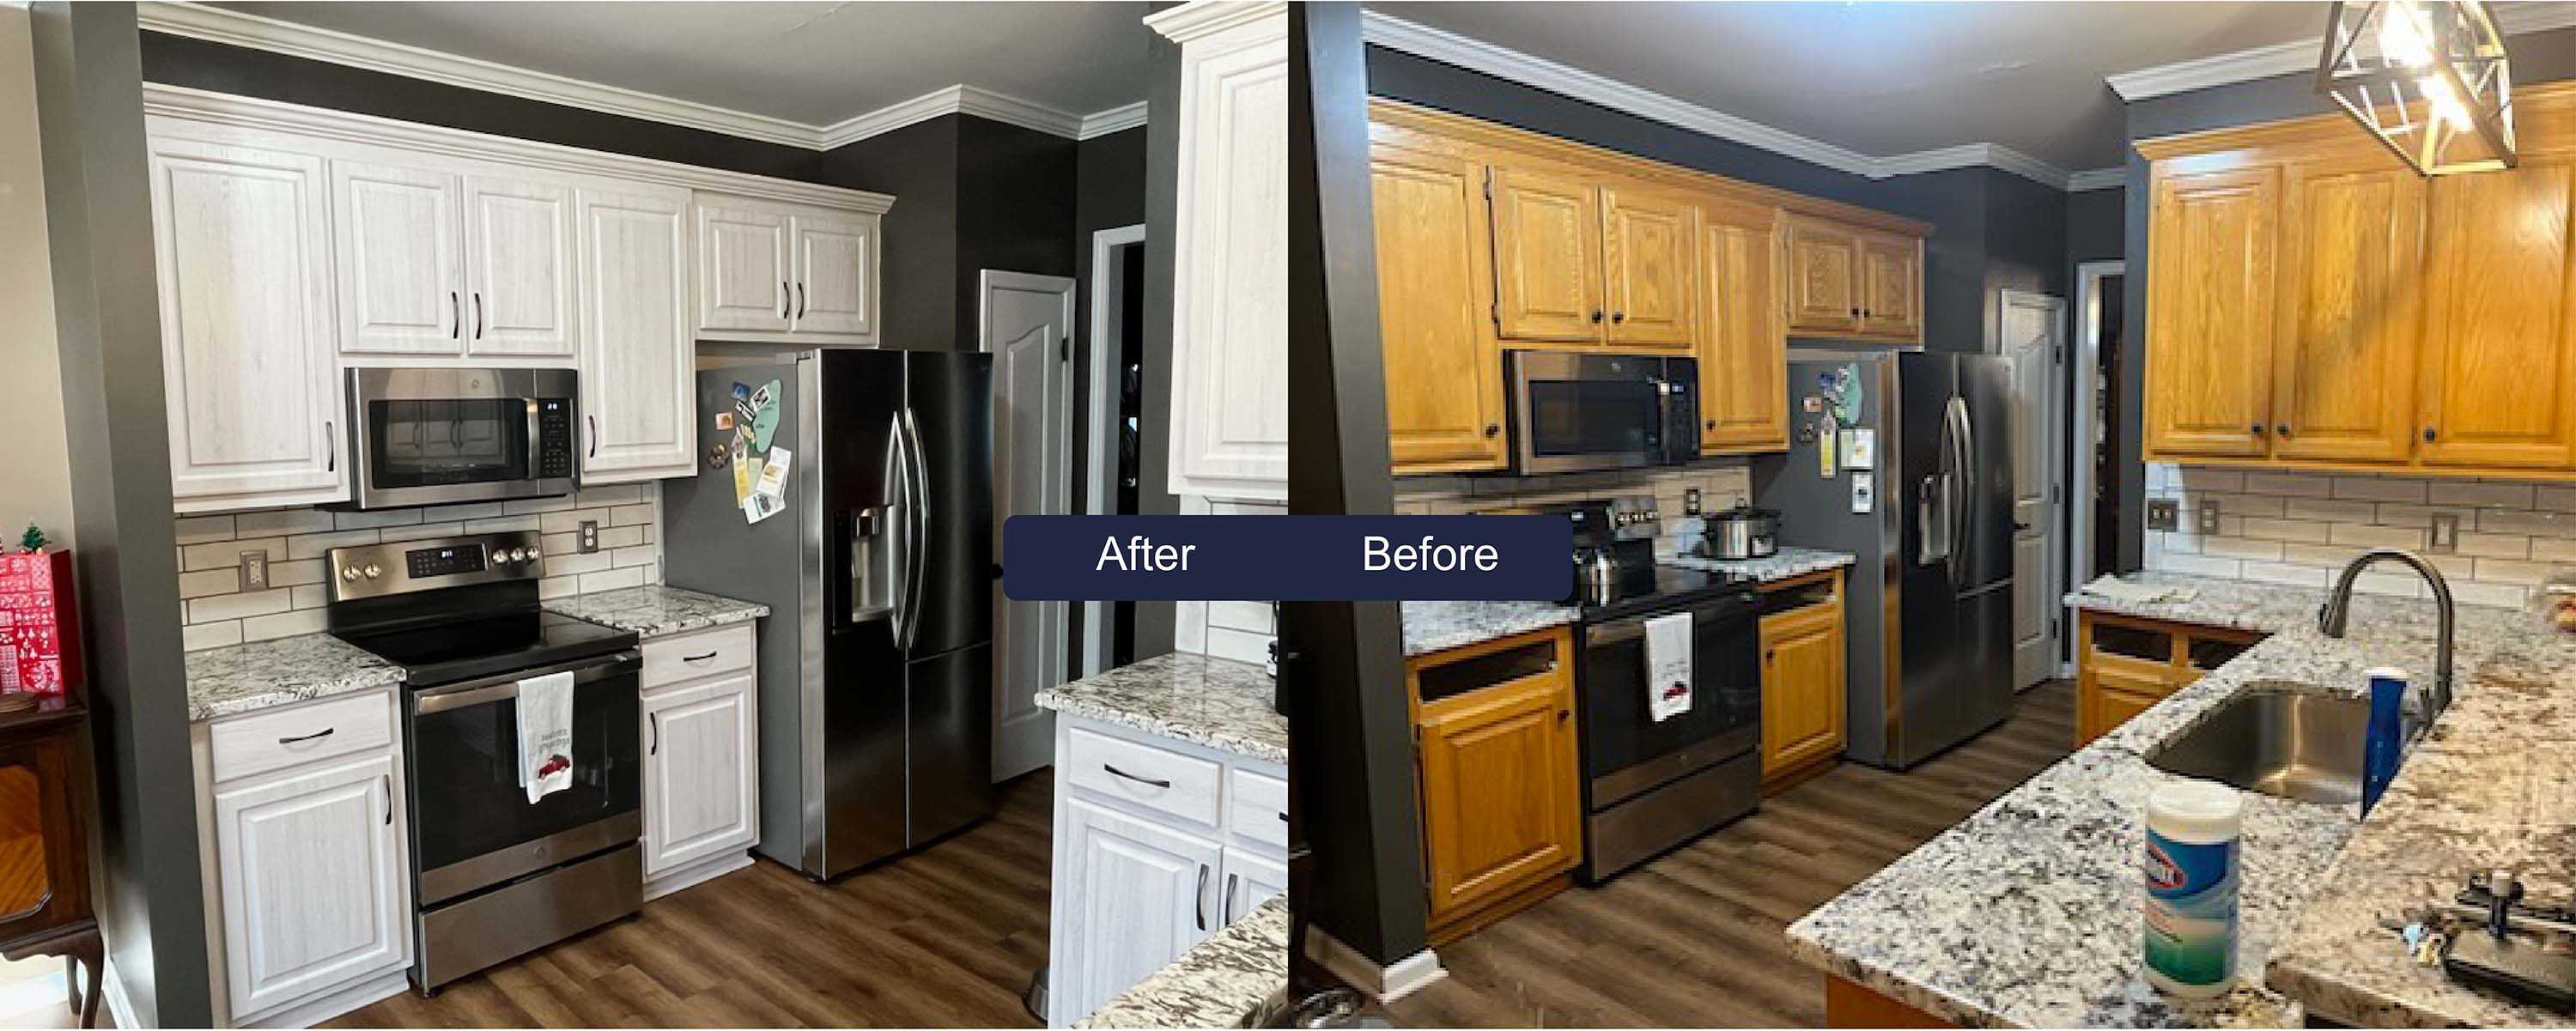 https://www.truguardconstruction.com/uploads/pages/TG-Before-After-Kitchen-Cabinets-Teague_2023-02-08-004101_puqh.jpg